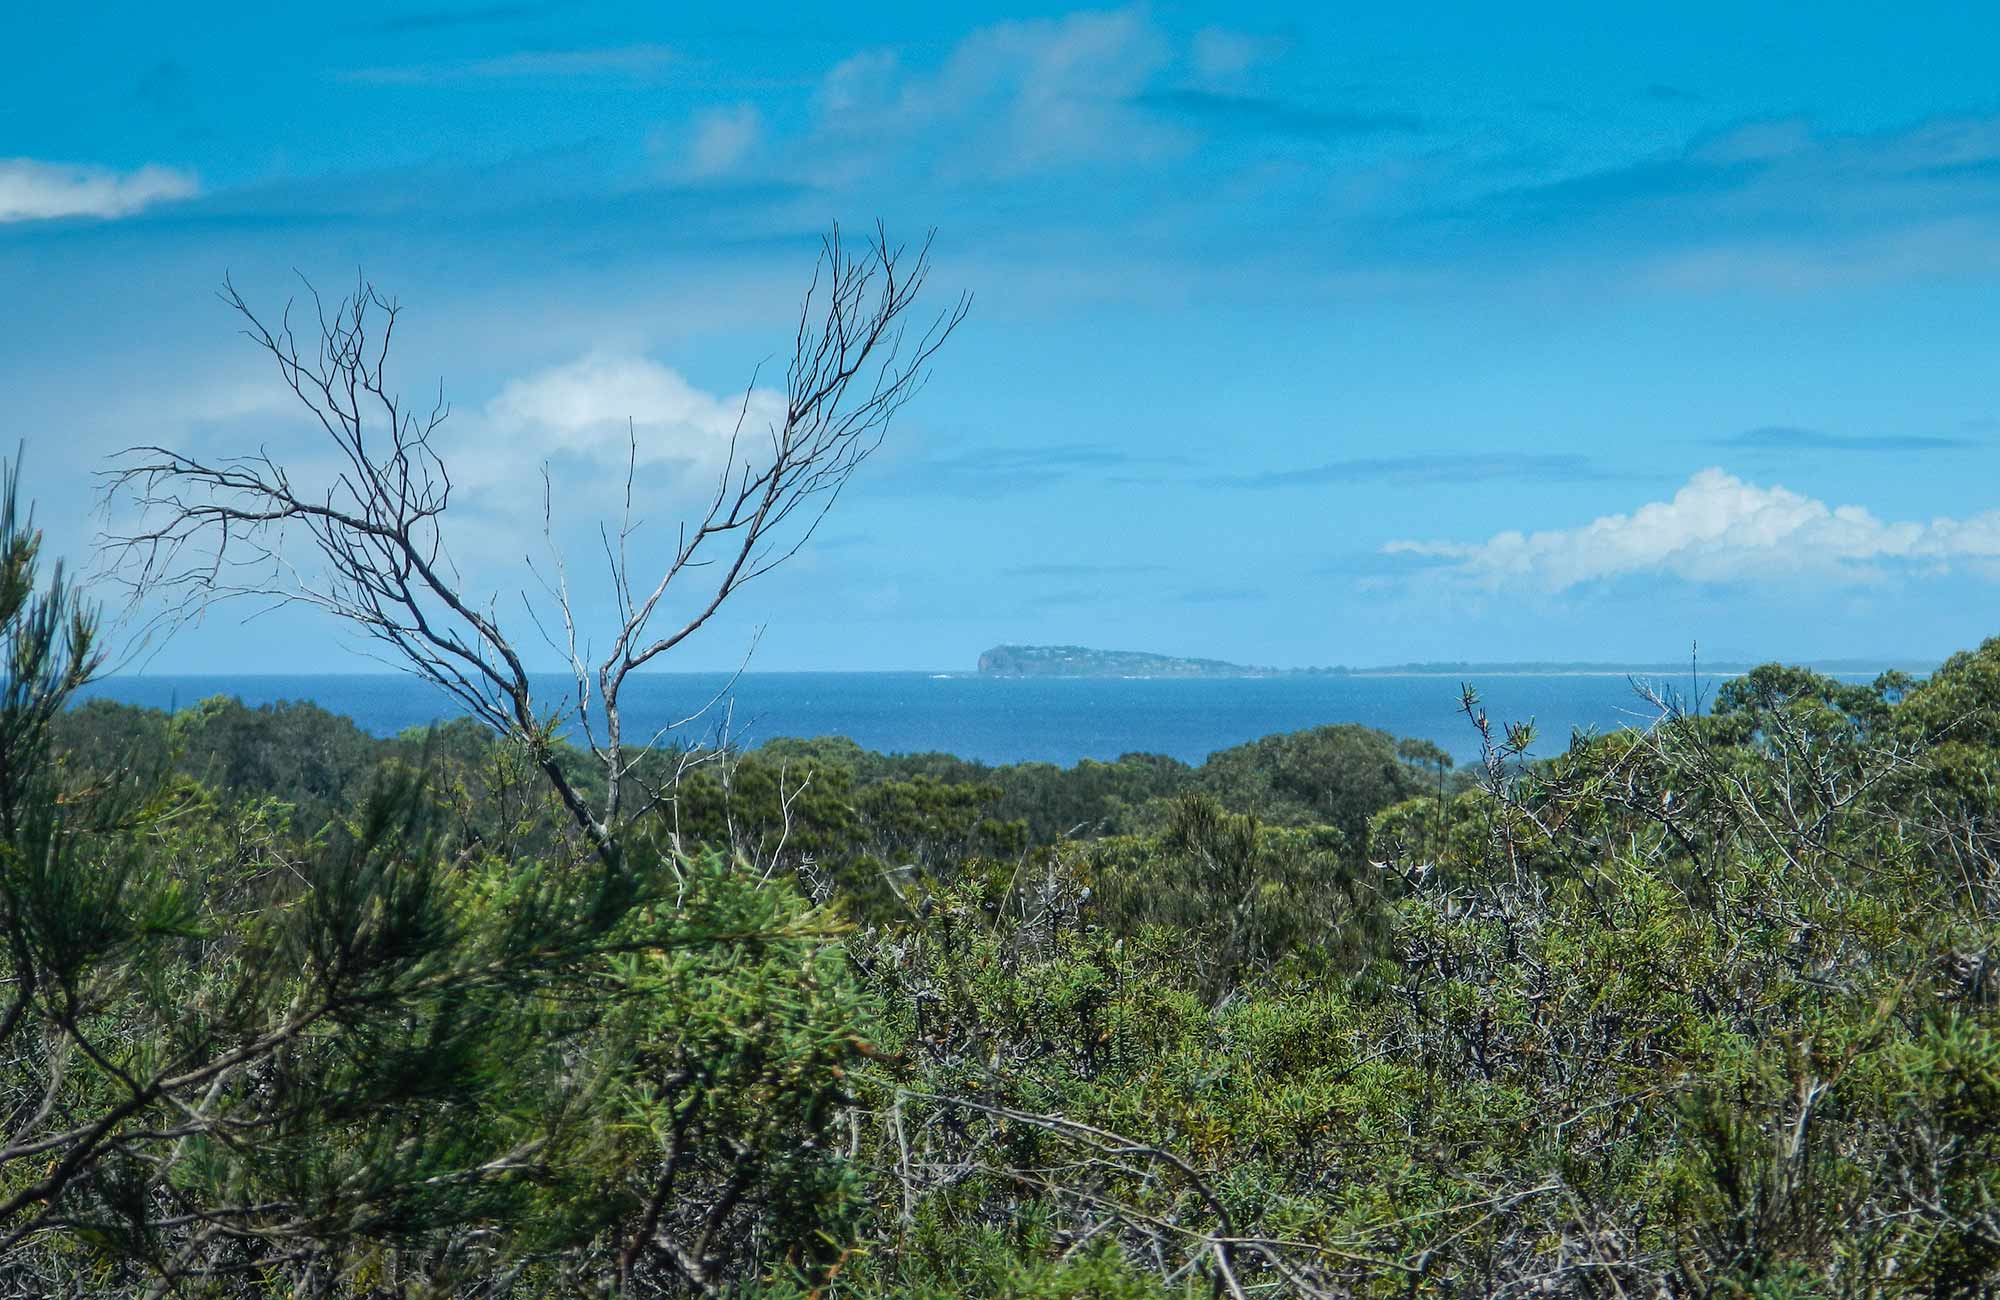 Forest walking track, Crowdy Bay National Park. Photo: Debby McGerty/NSW Government